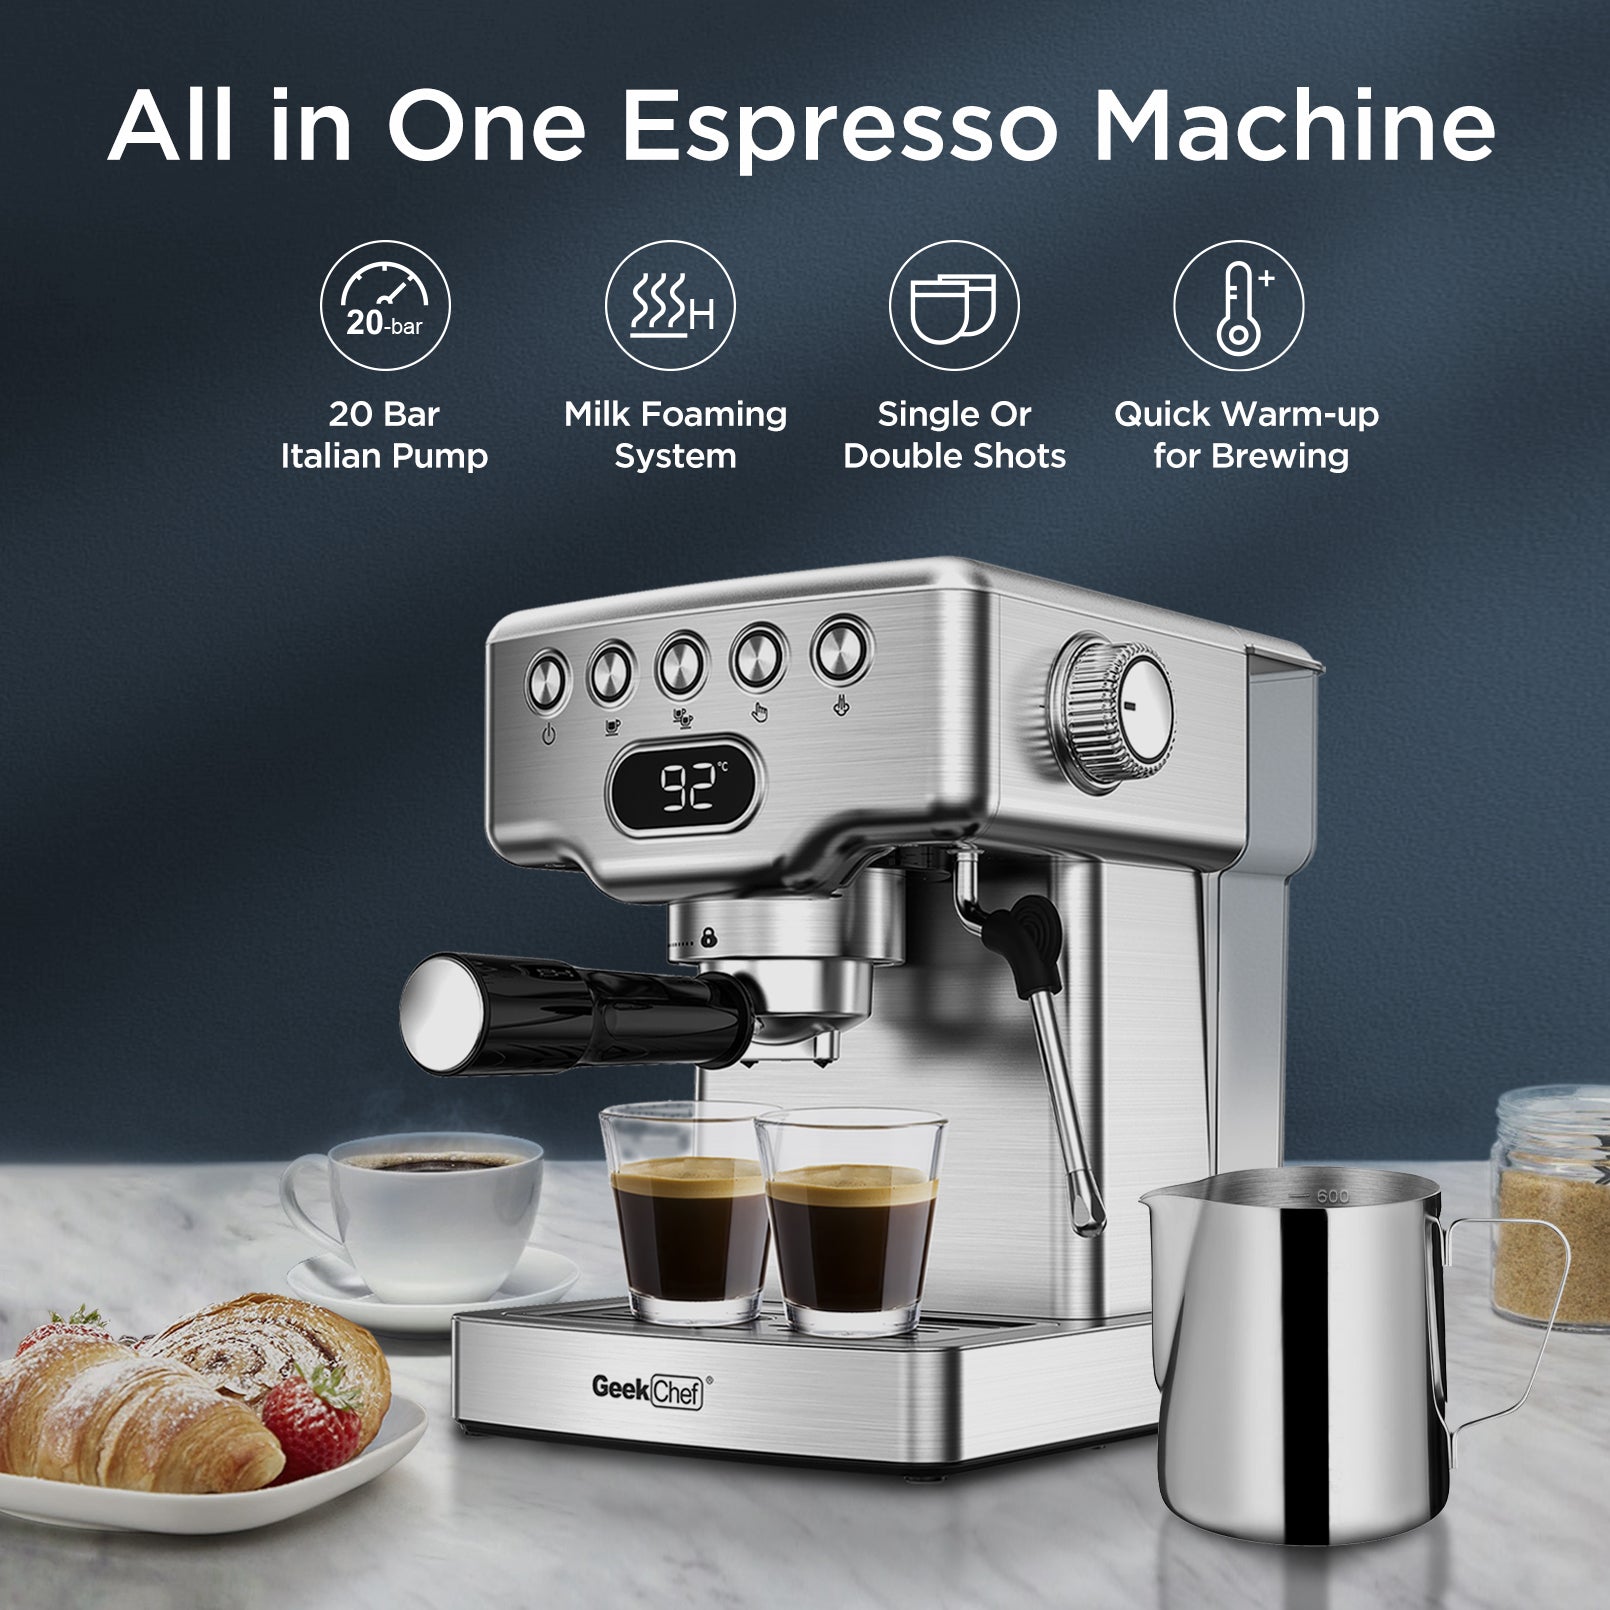 Geek Chef Espresso Machines,Espresso Maker for home, Latte & Cappuccino Maker, 20 Bar Pump Pressure and Milk Frother Steam Wand,Stainless Steel, with Temperature Display